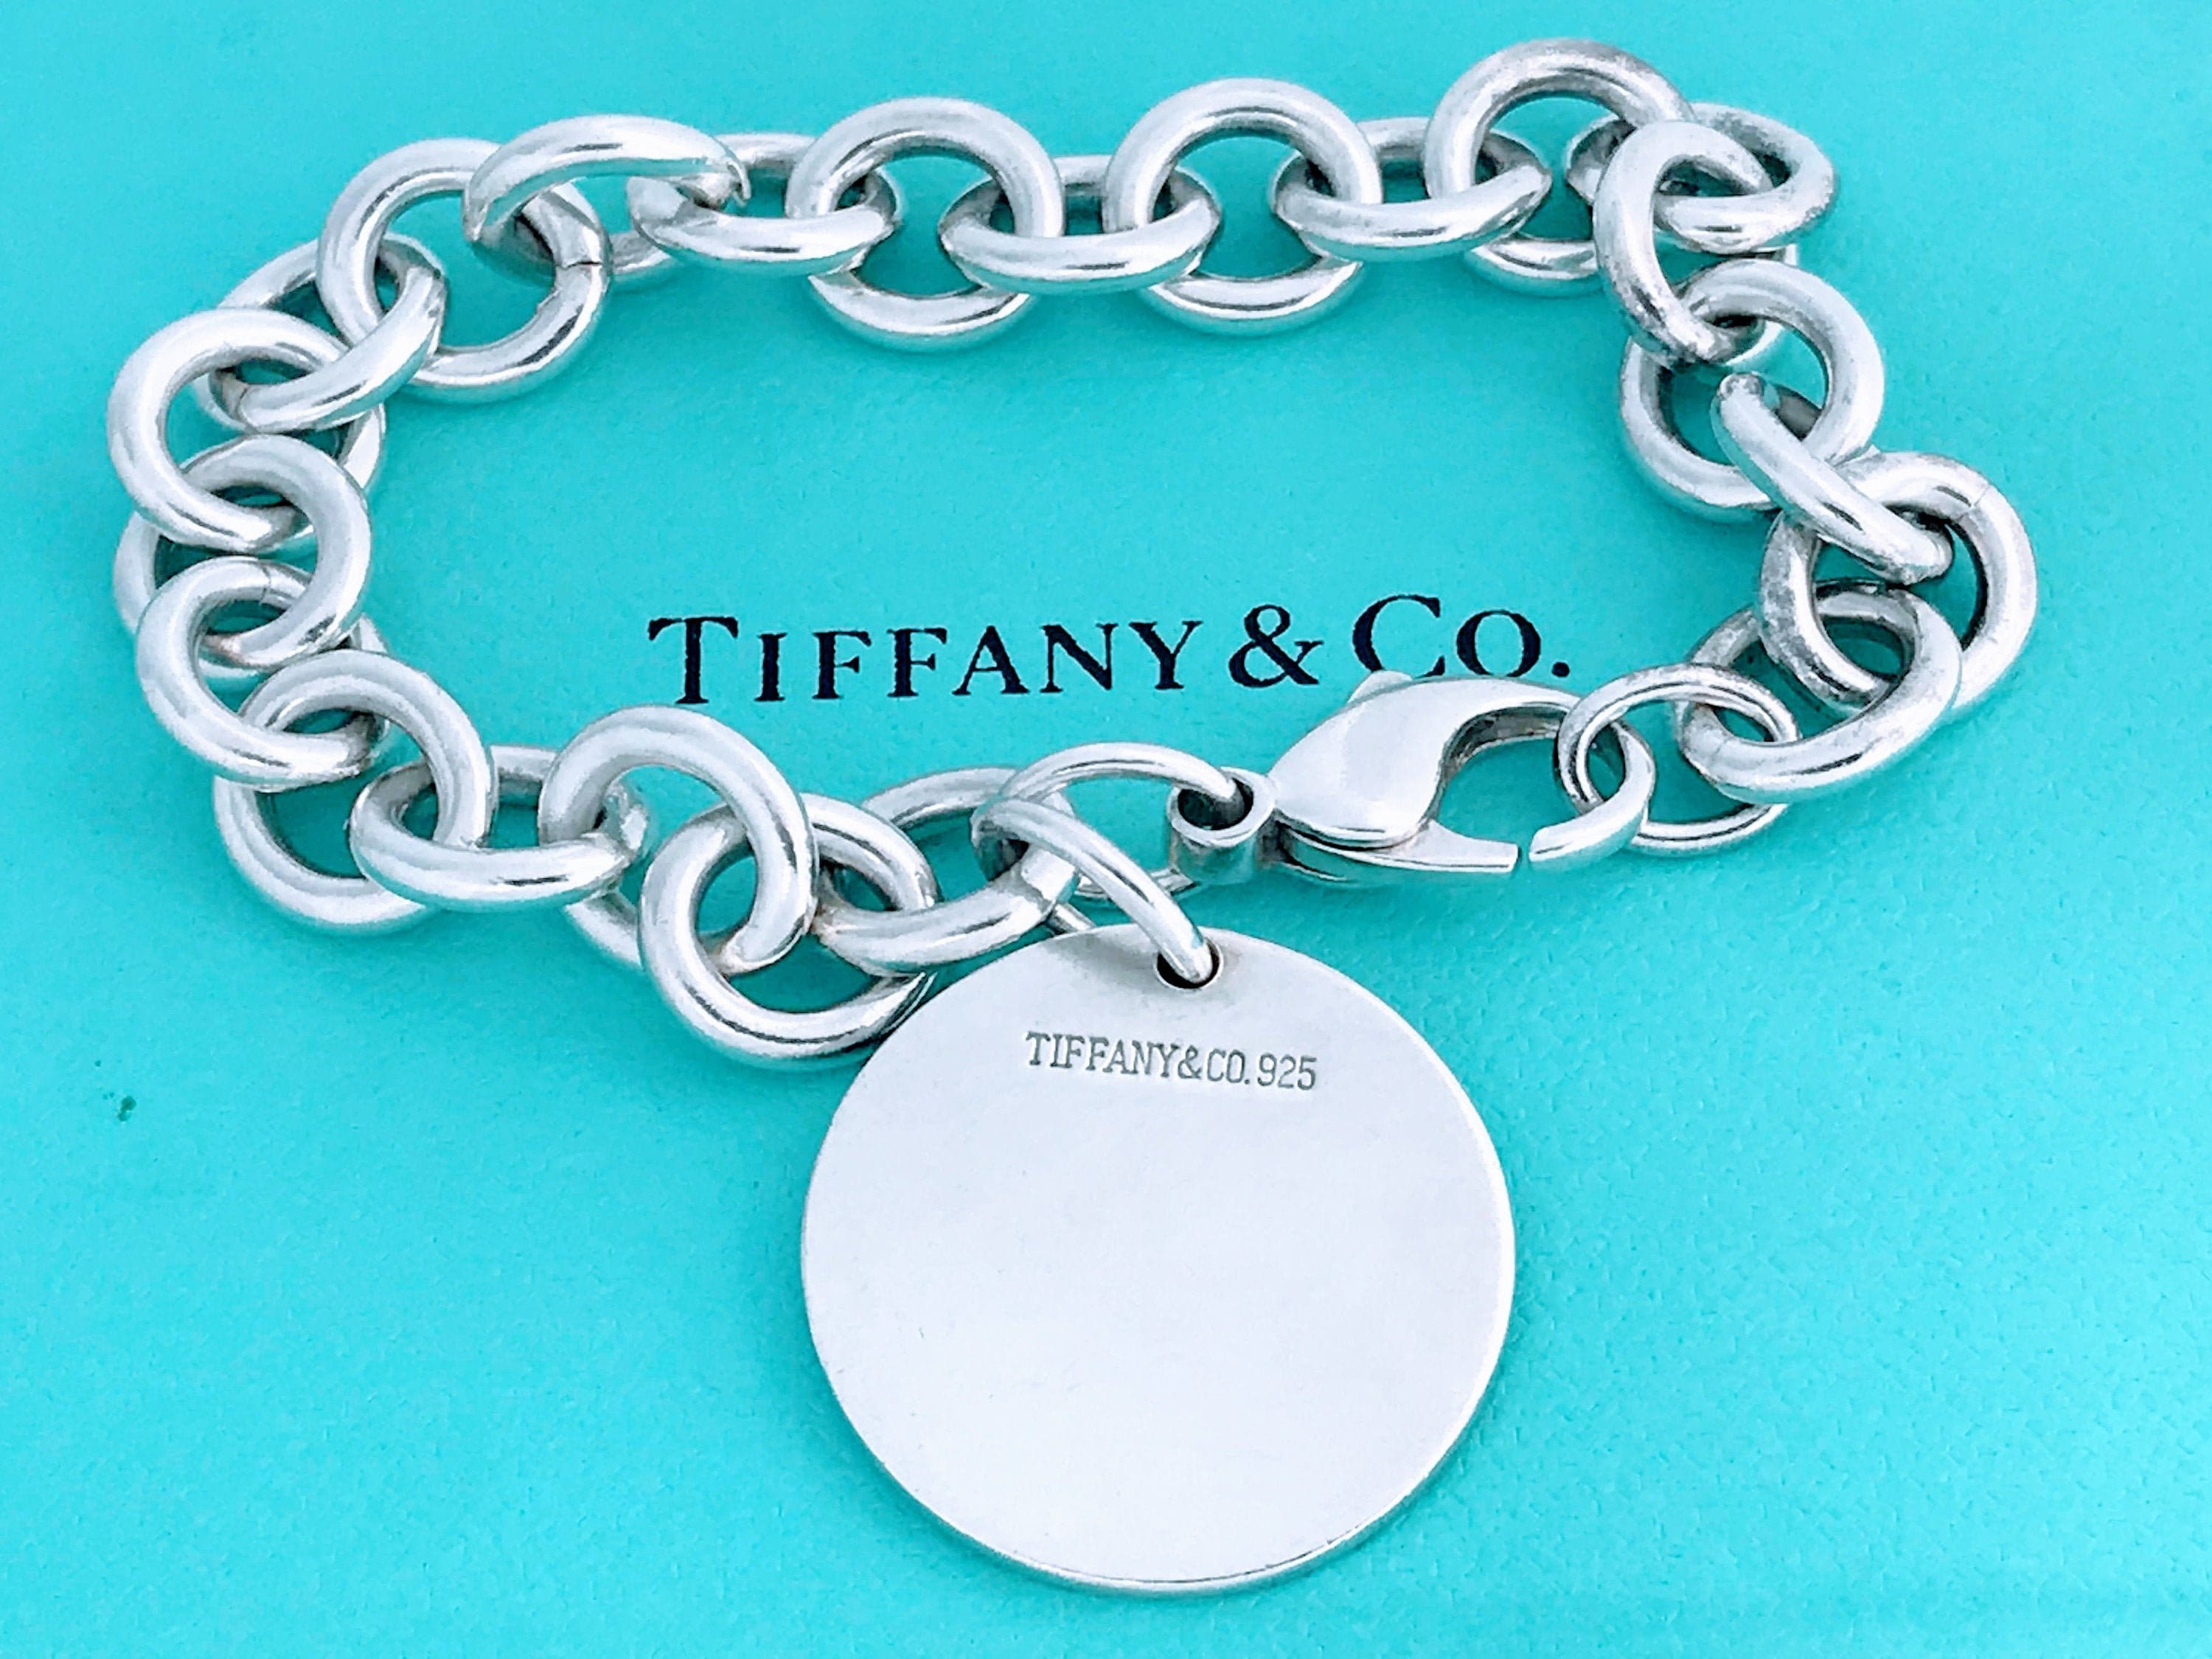 Tiffany T Square Bracelet in Sterling Silver, Extra Large